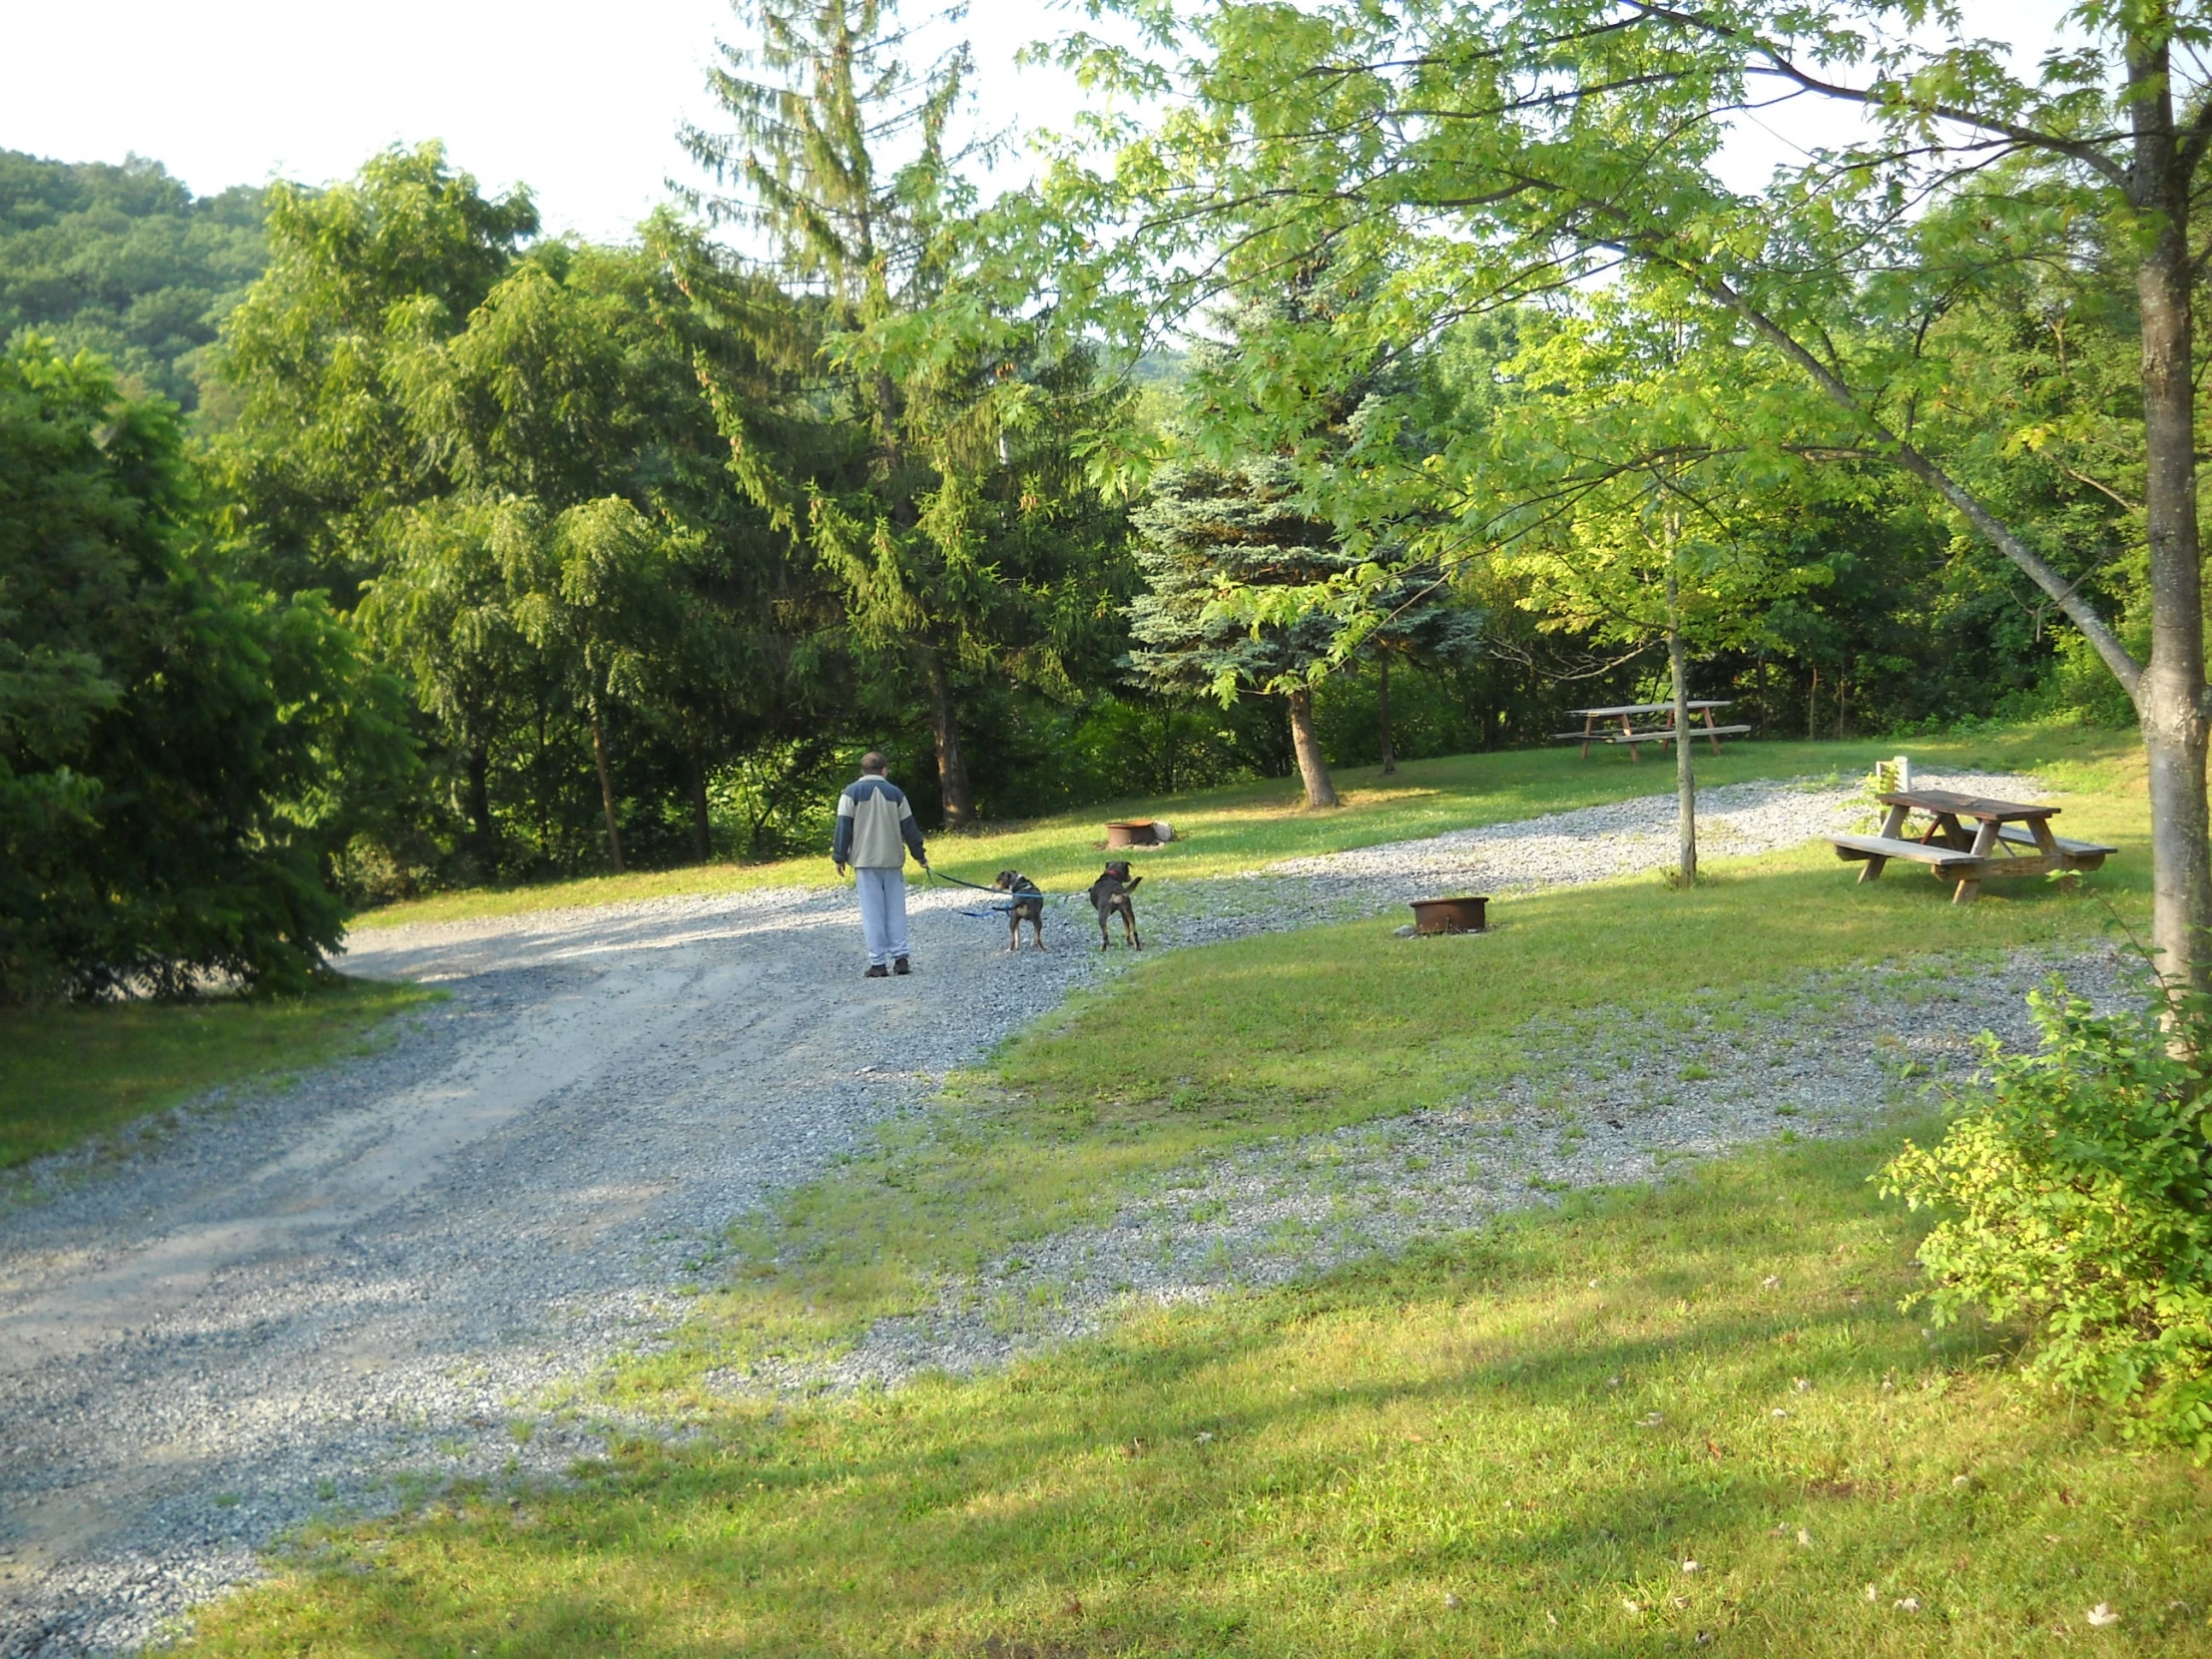 people in white clothes walking in a wooded area